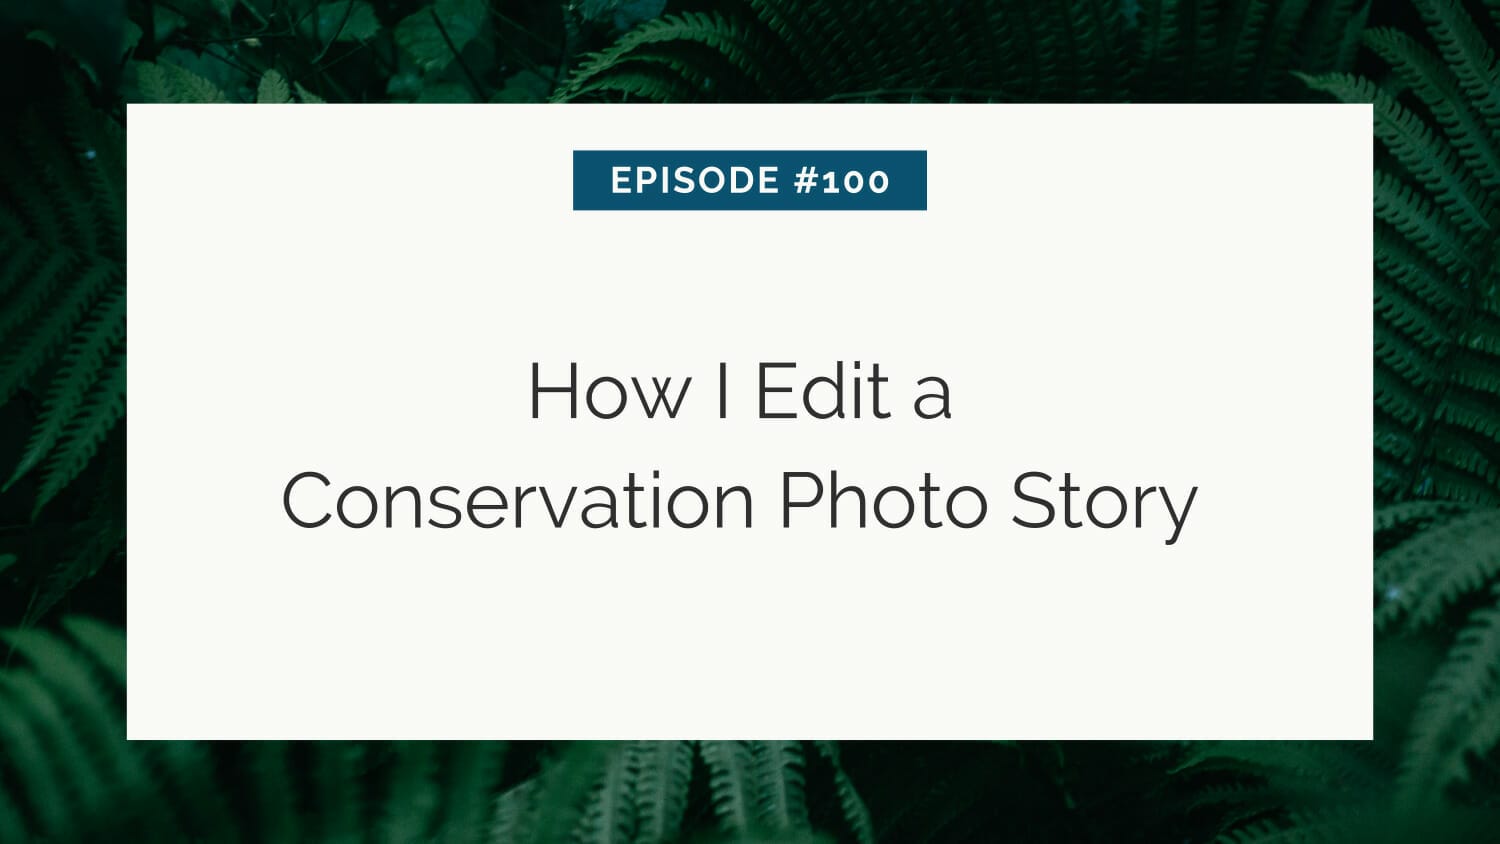 Episode #100: how i edit a conservation photo story, set against a backdrop of lush green foliage.